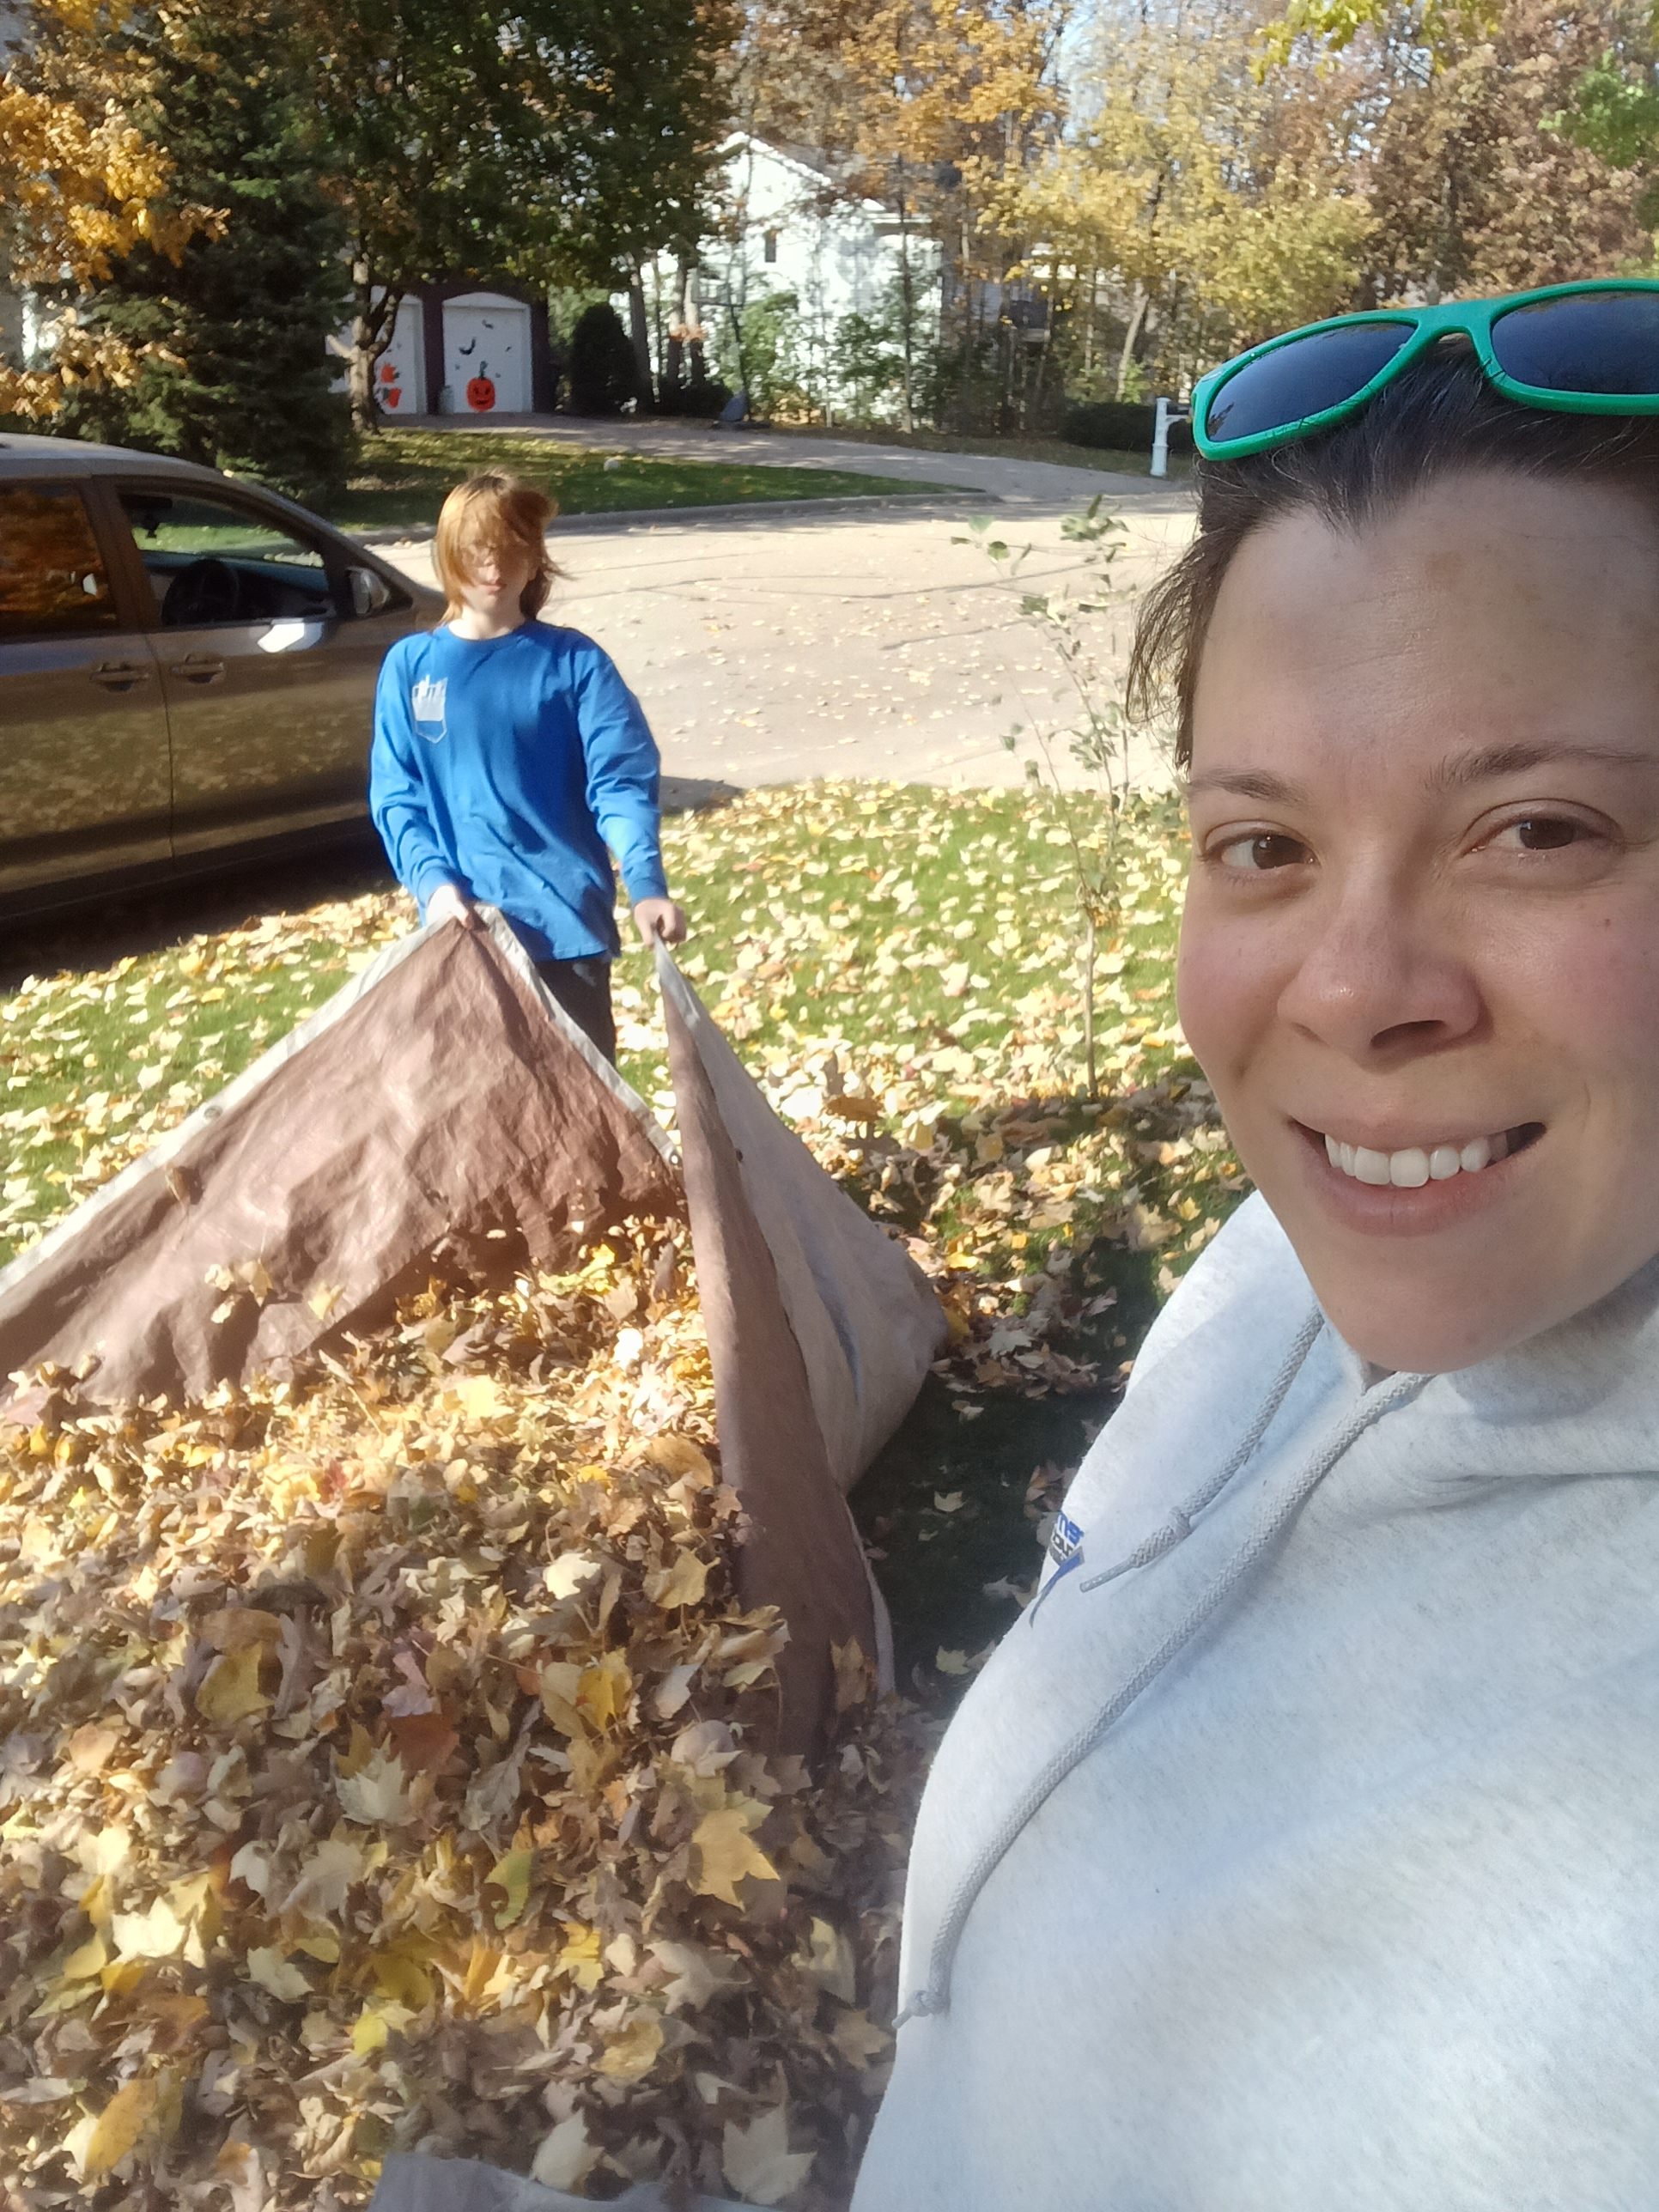 Work smarter, not harder – How to quickly get rid of fall leaves